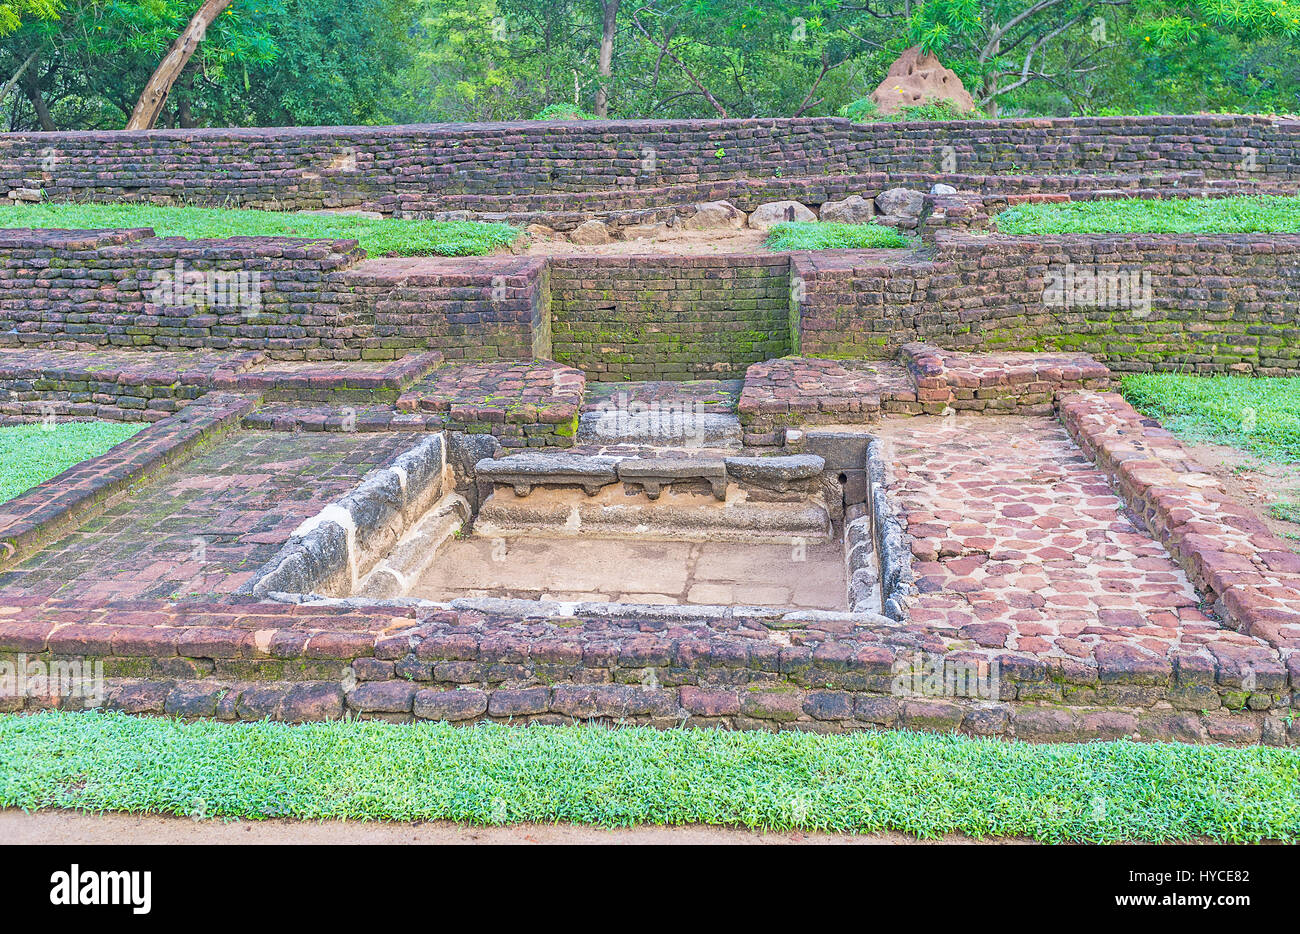 The ruins of the ancient town at Sigiriya archaeological site, the famous landmark of Matale district, Sri Lanka. Stock Photo